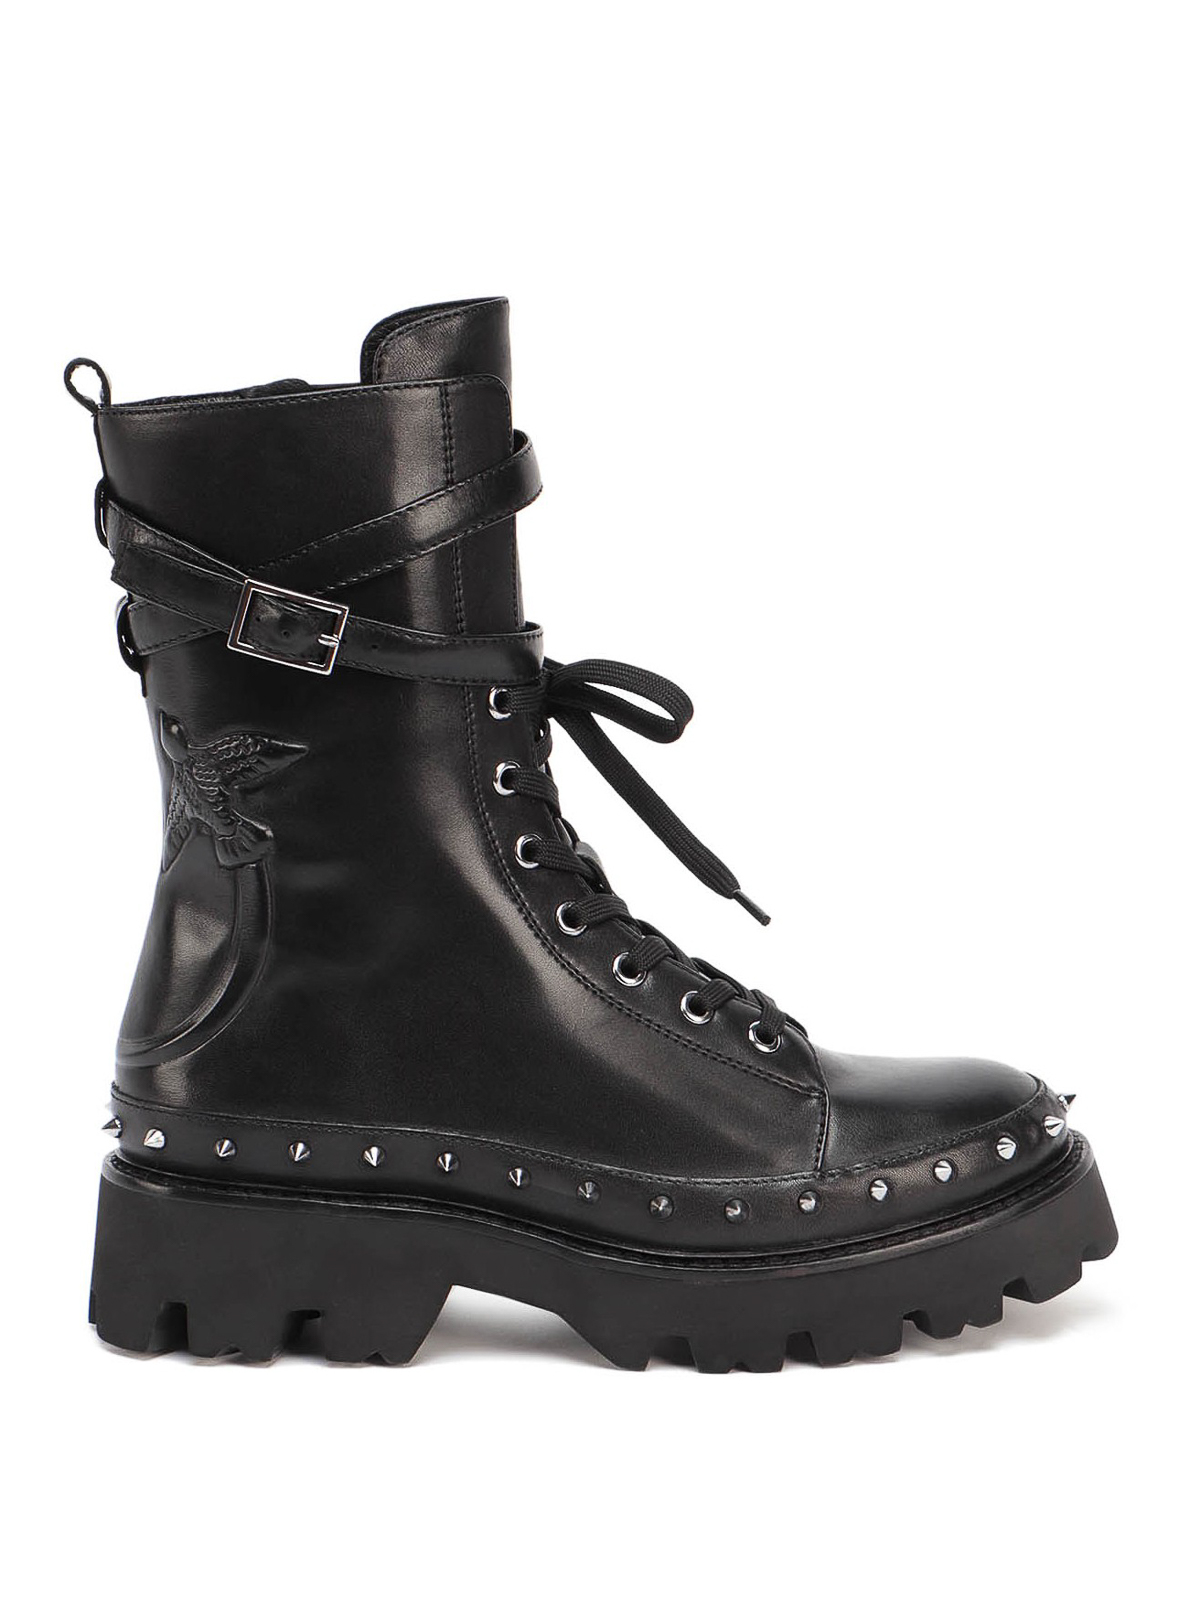 Ankle boots Pinko - Chaval combat boots - 1H20XWY7K6Z99 | iKRIX.com